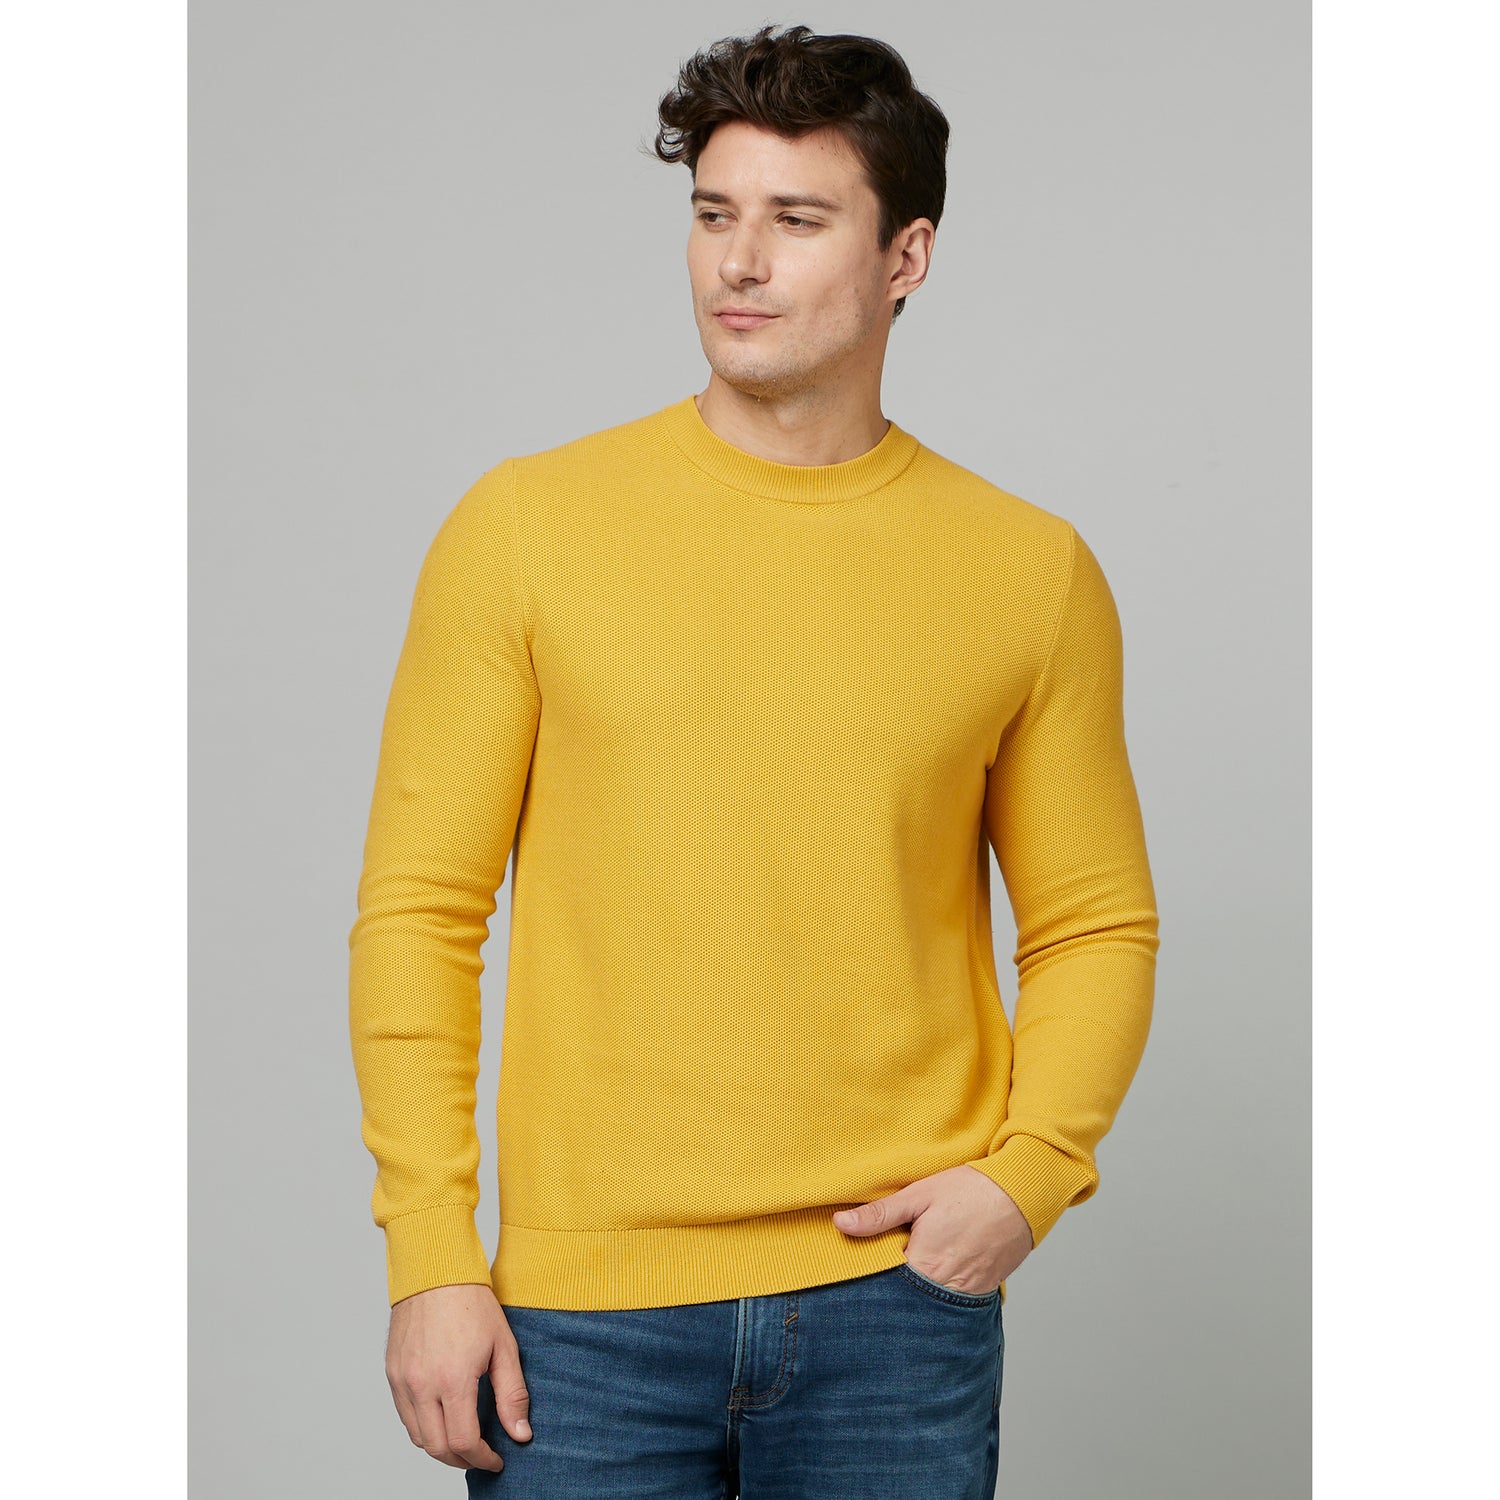 Yellow Round Neck Long Sleeve Cotton Pullover Sweater (BEPICIN)